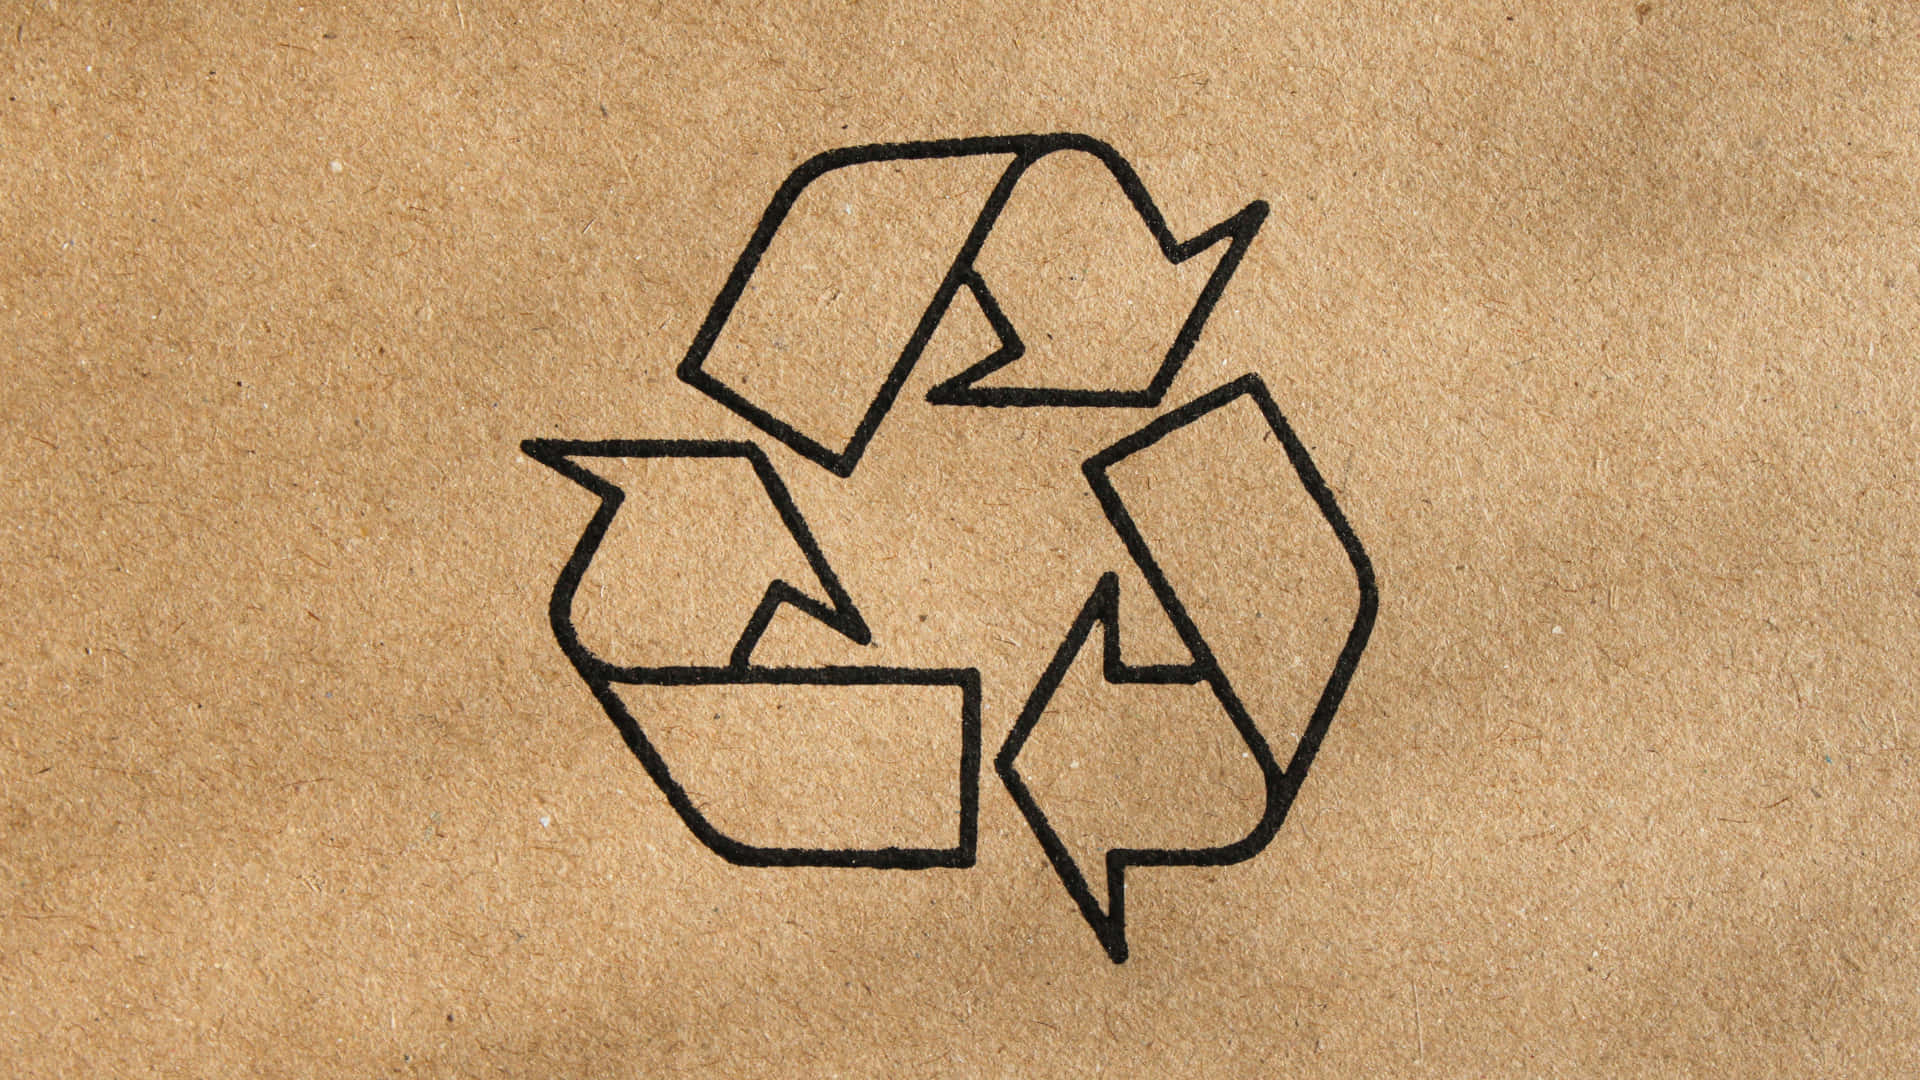 Earth Day, Recycling for a Better Future